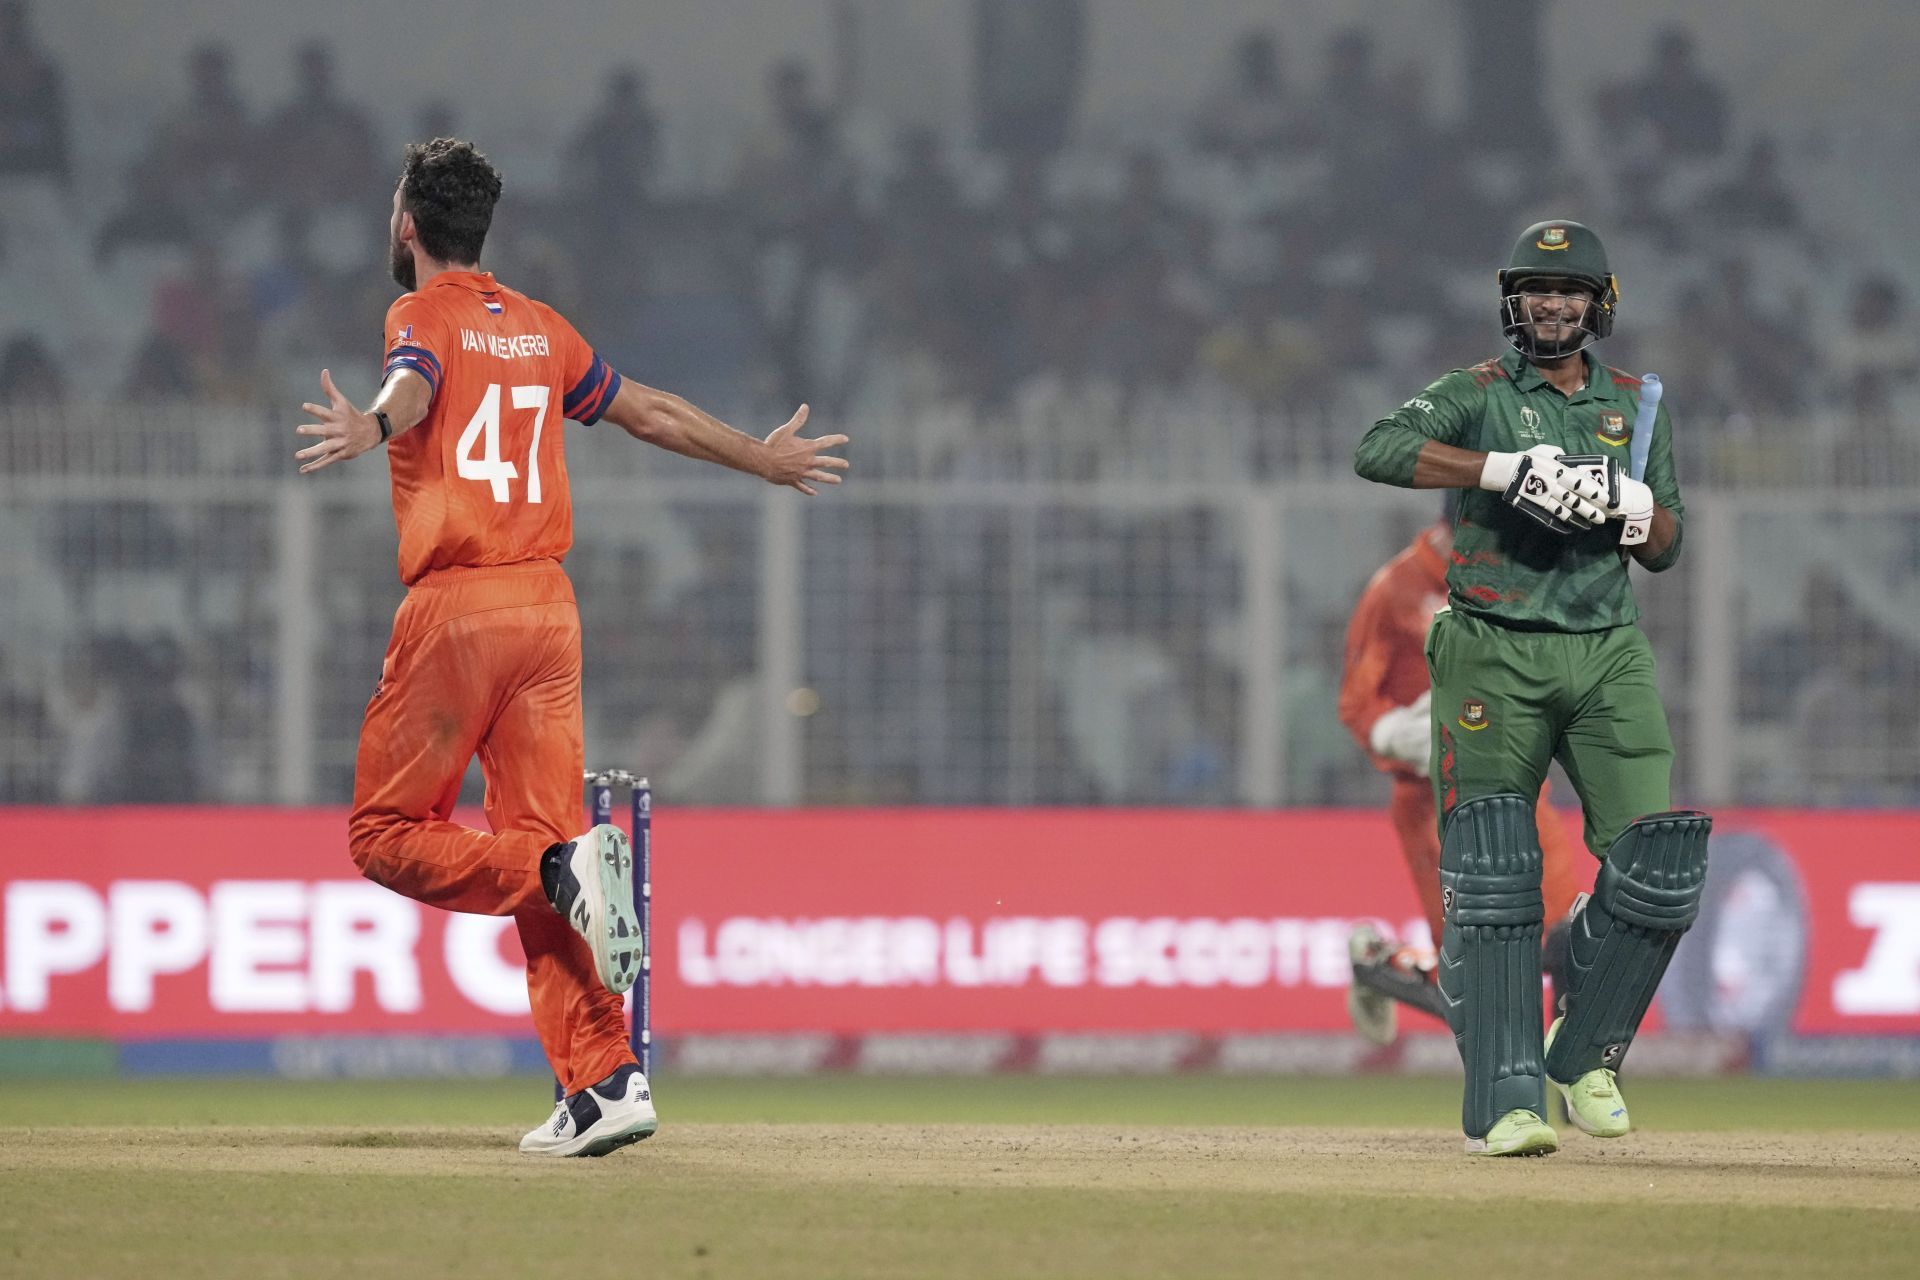 Shakib Al Hasan averages 12.20 with the bat in the ongoing World Cup. [P/C: AP]